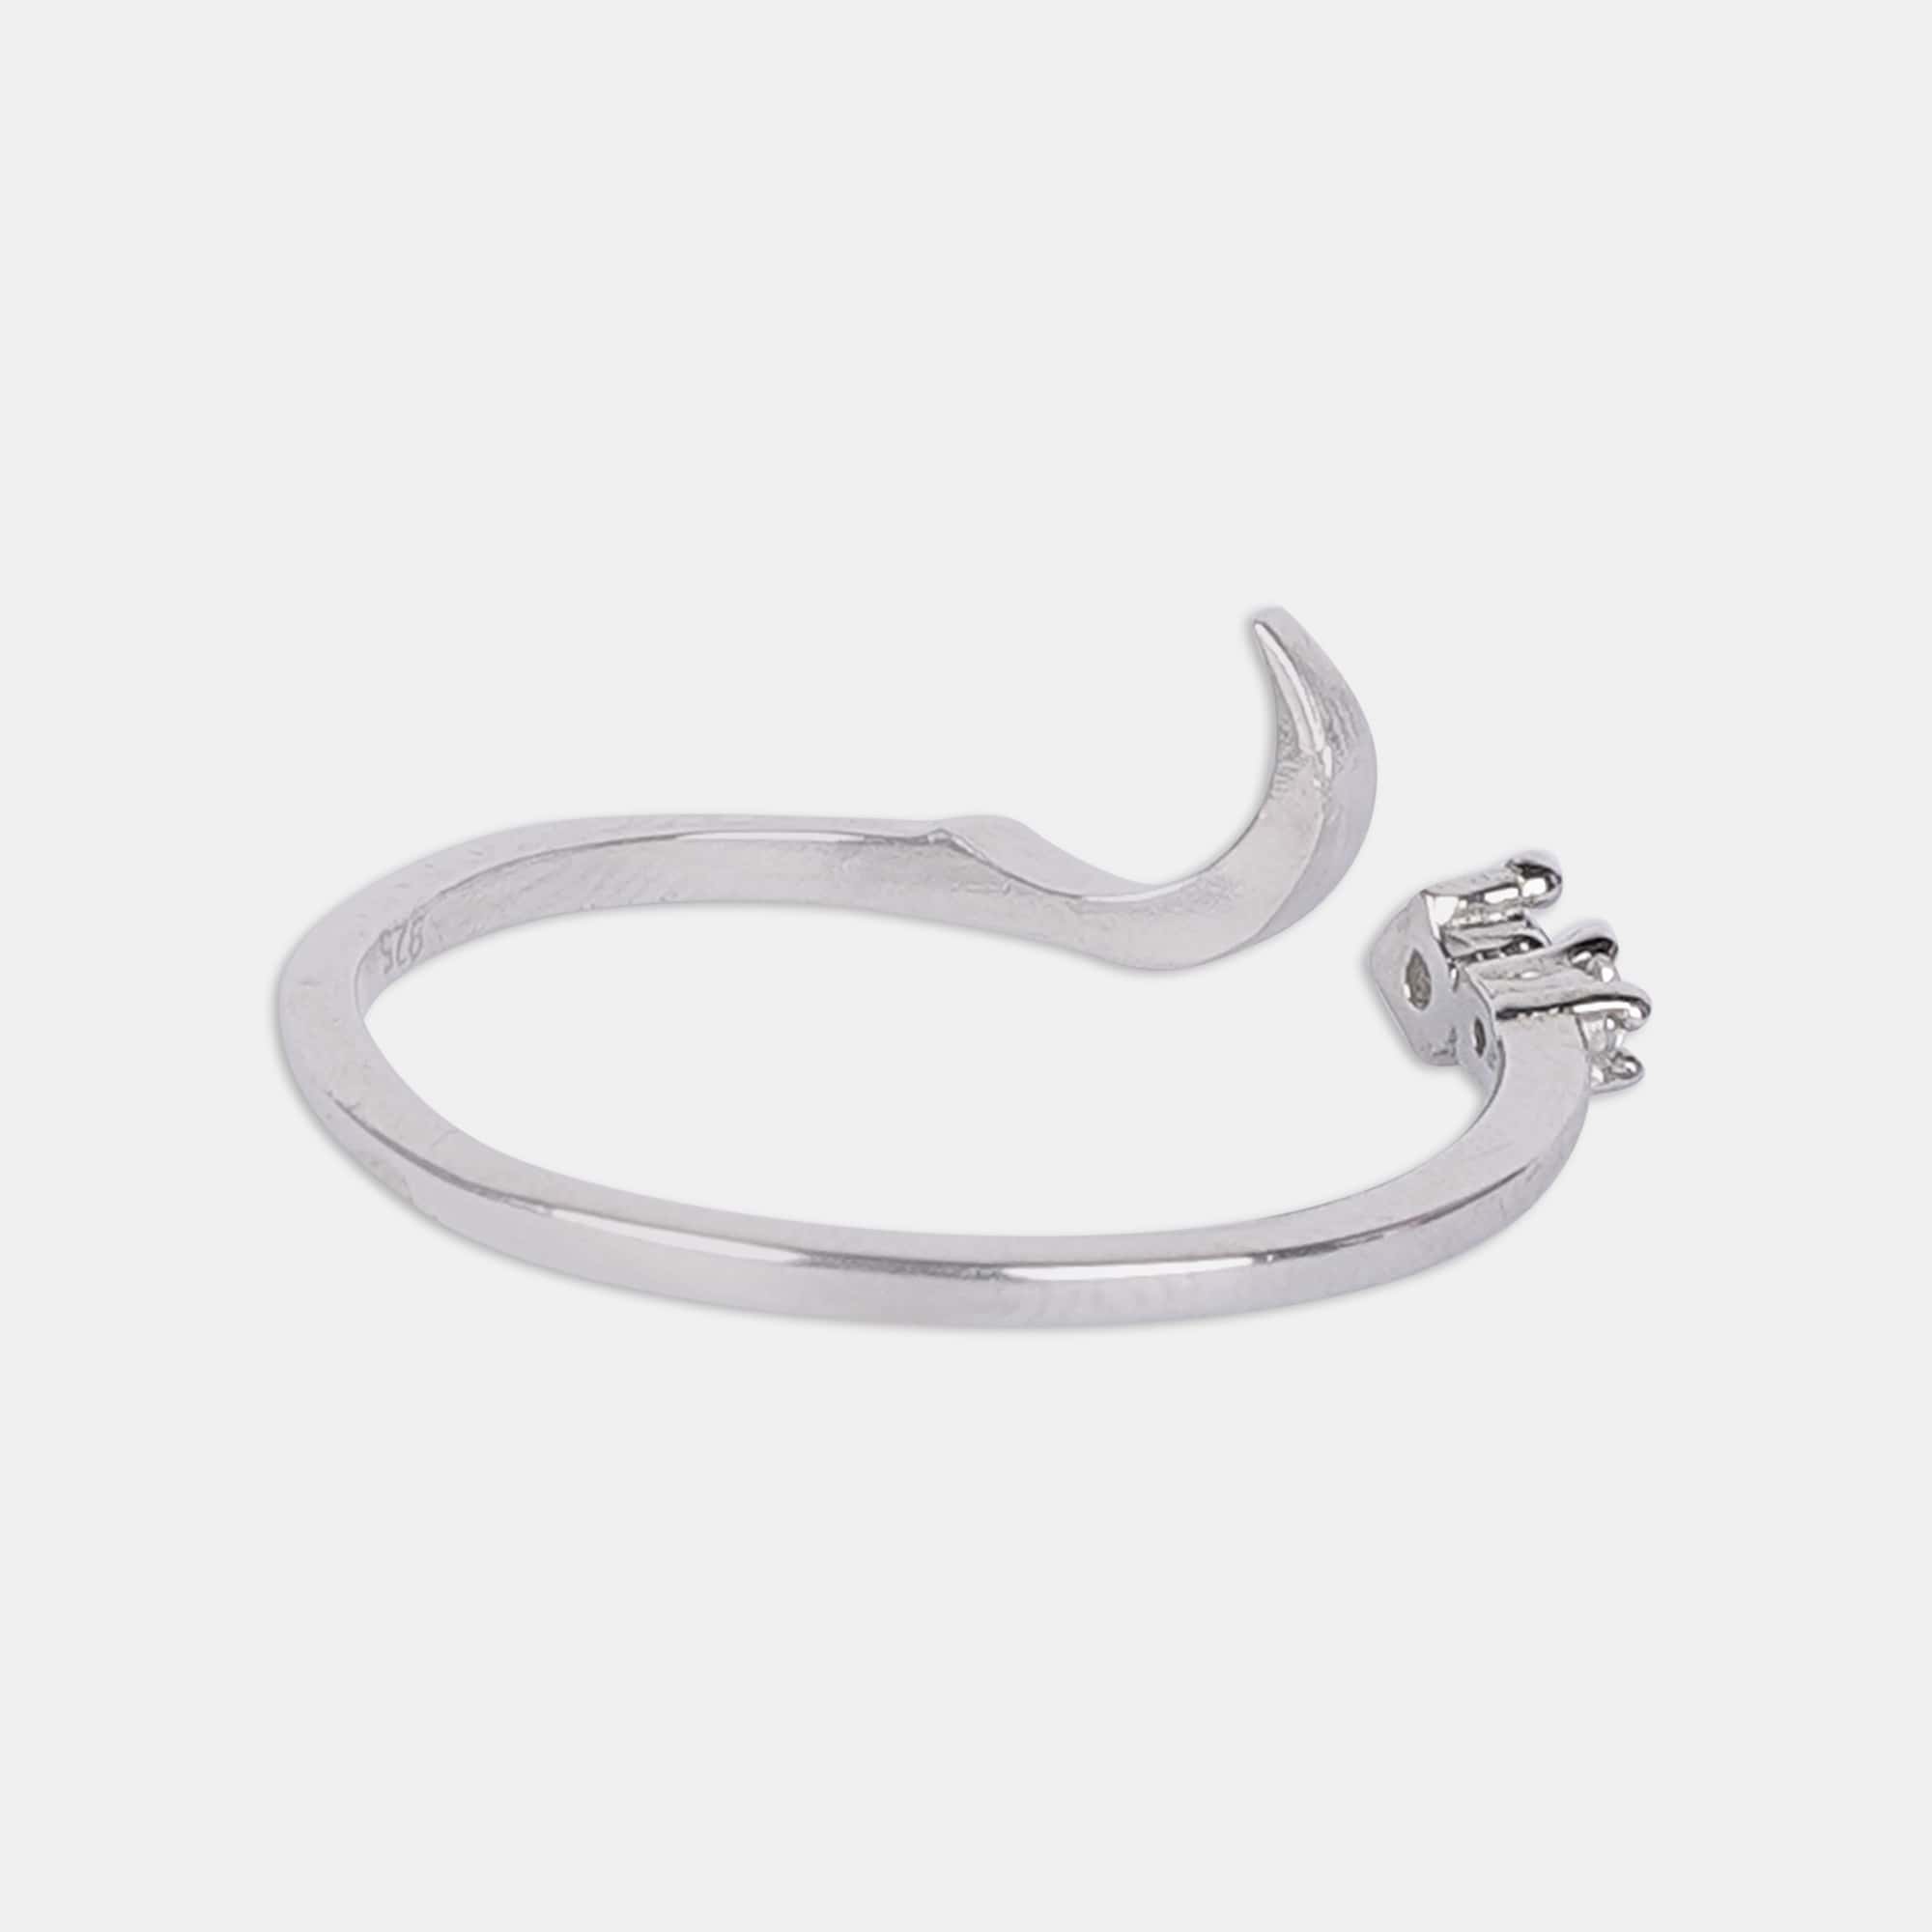 A sterling silver ring featuring a delicate crescent and star design